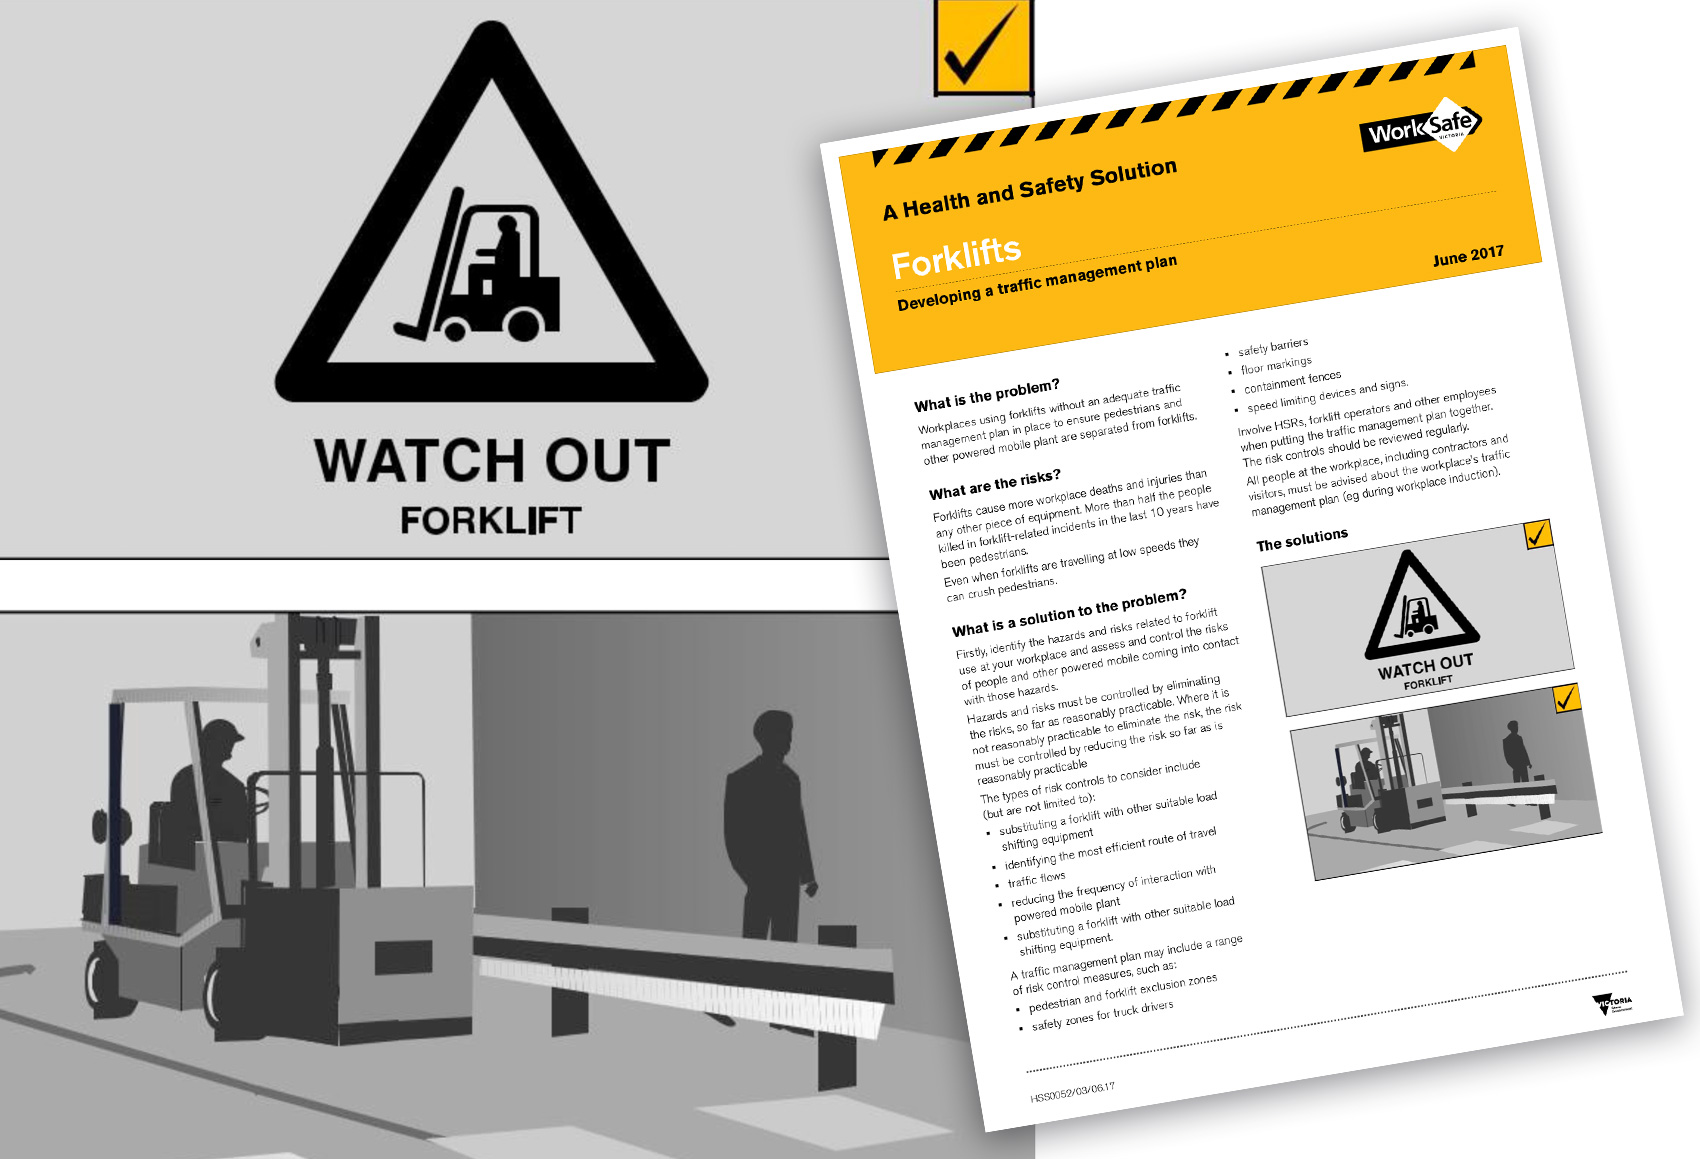 Do you use forklifts at your workplace? Do you have a traffic ...